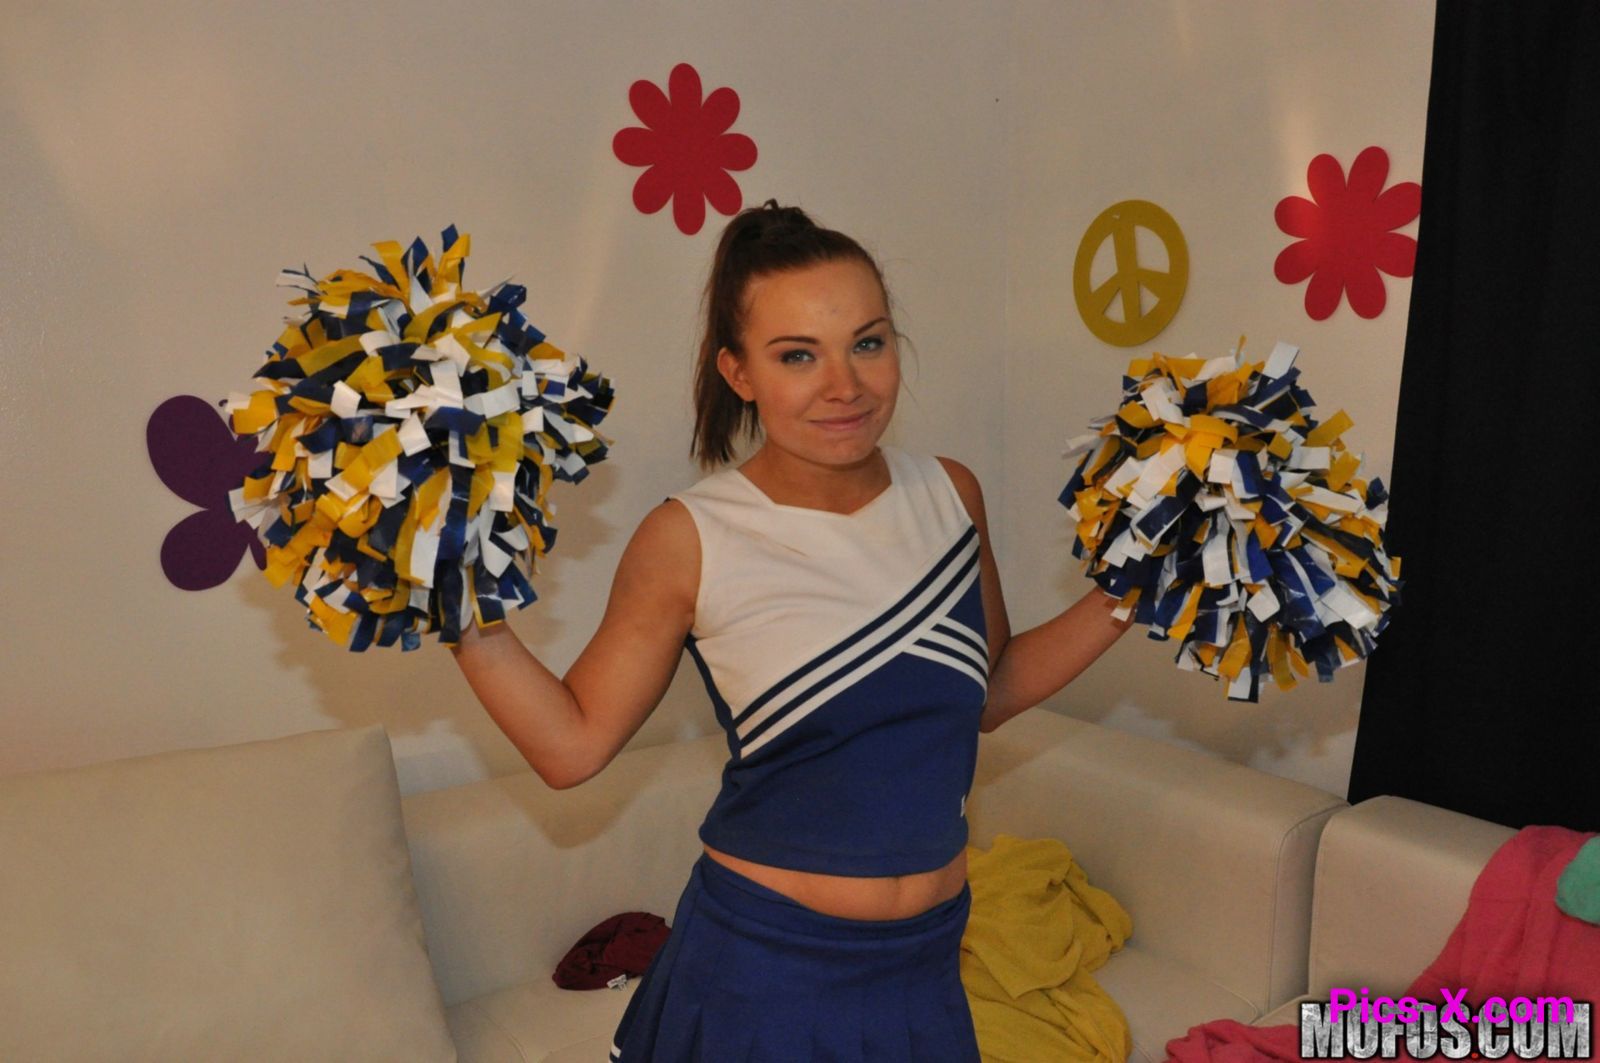 Cheerleader Teen Home Video - I Know That Girl - Image 7